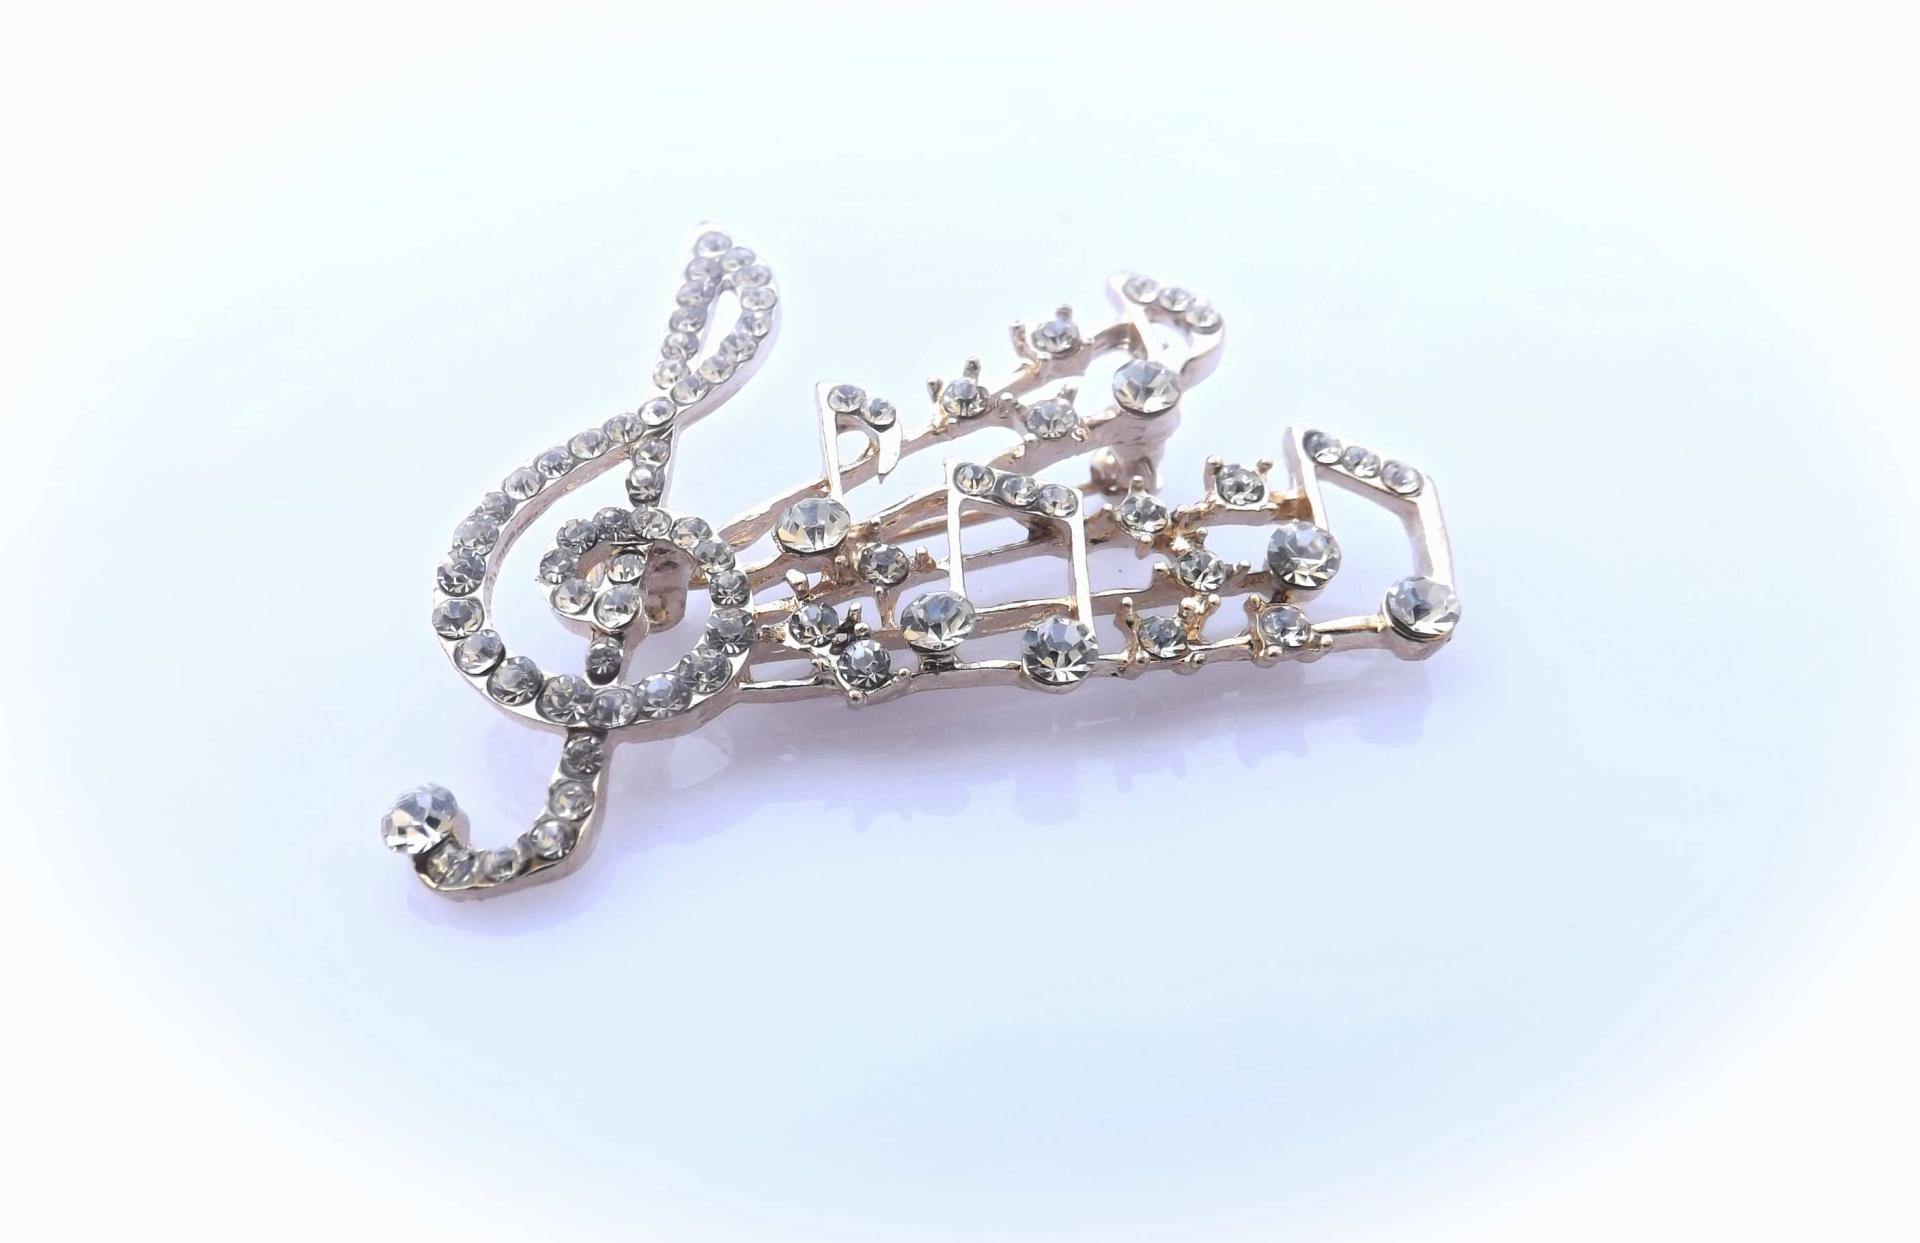 Music Note and Clef Brooch with Austrian Crystals